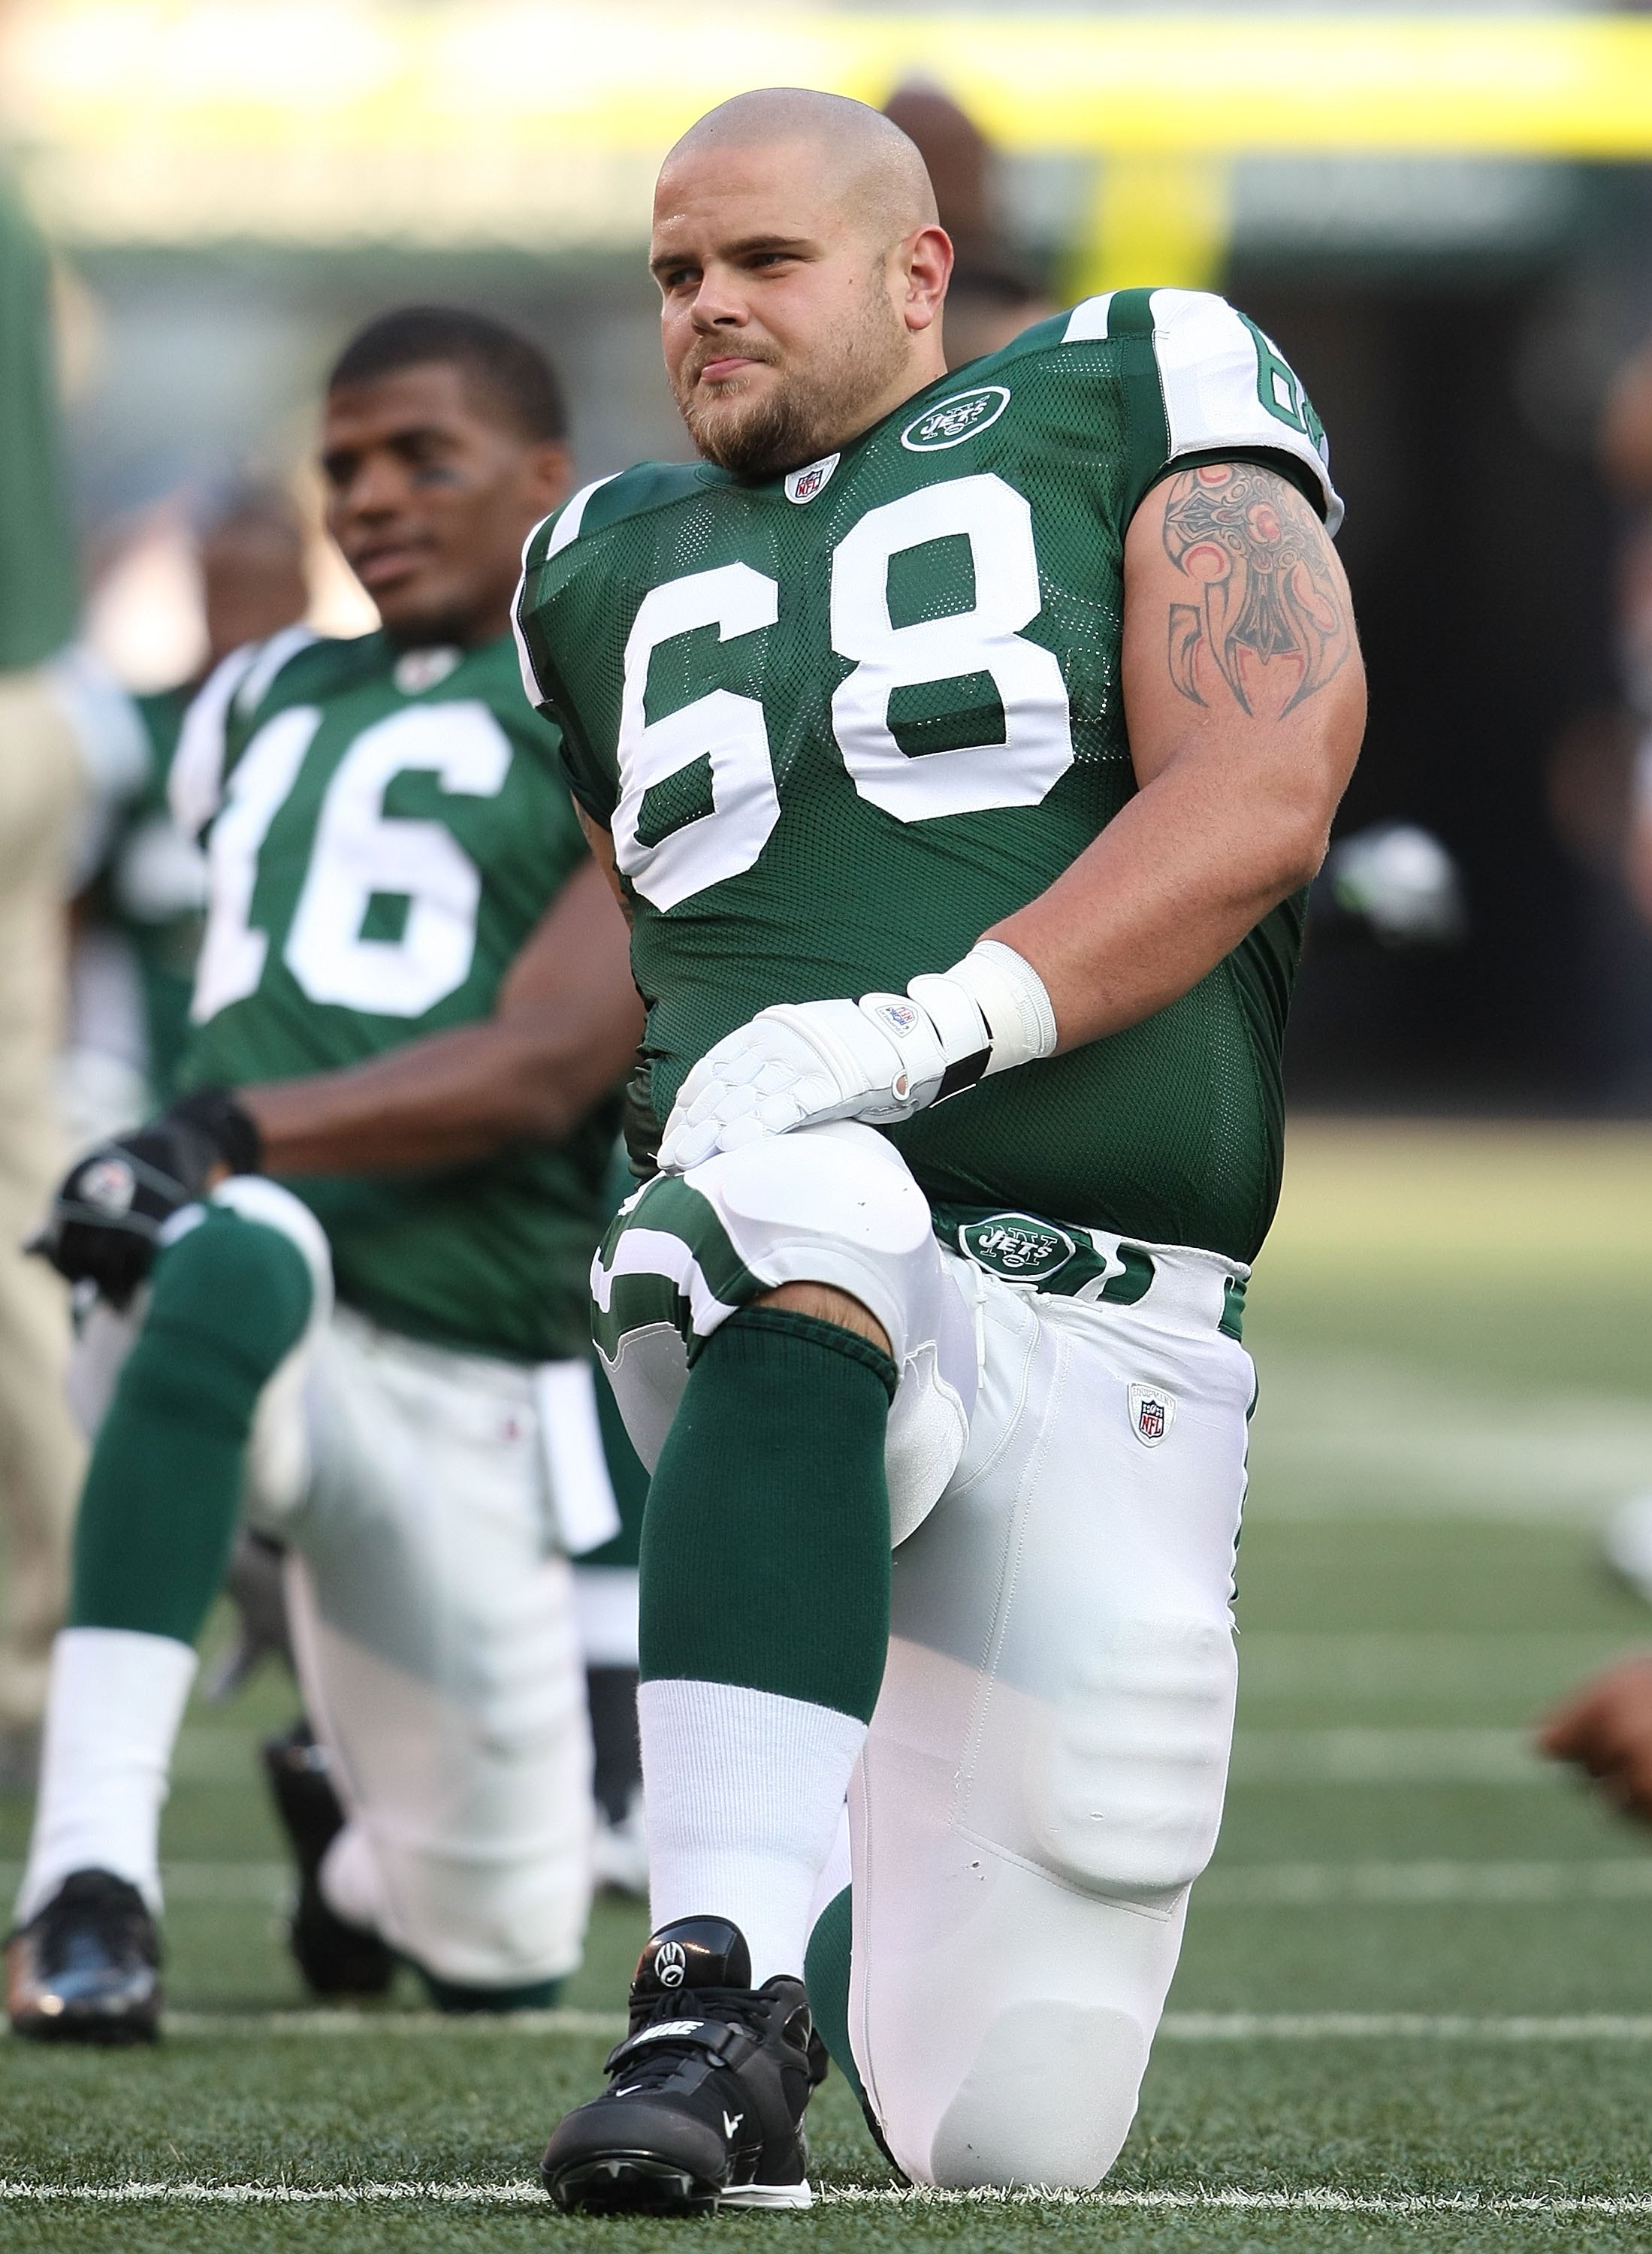 EAST RUTHERFORD, NJ - AUGUST 14:  Matt Slauson #68 of the New York Jets  warms up against the St. Louis Rams during their preseason game at Giants Stadium on August 14, 2009  in East Rutherford, New Jersey.  (Photo by Nick Laham/Getty Images)